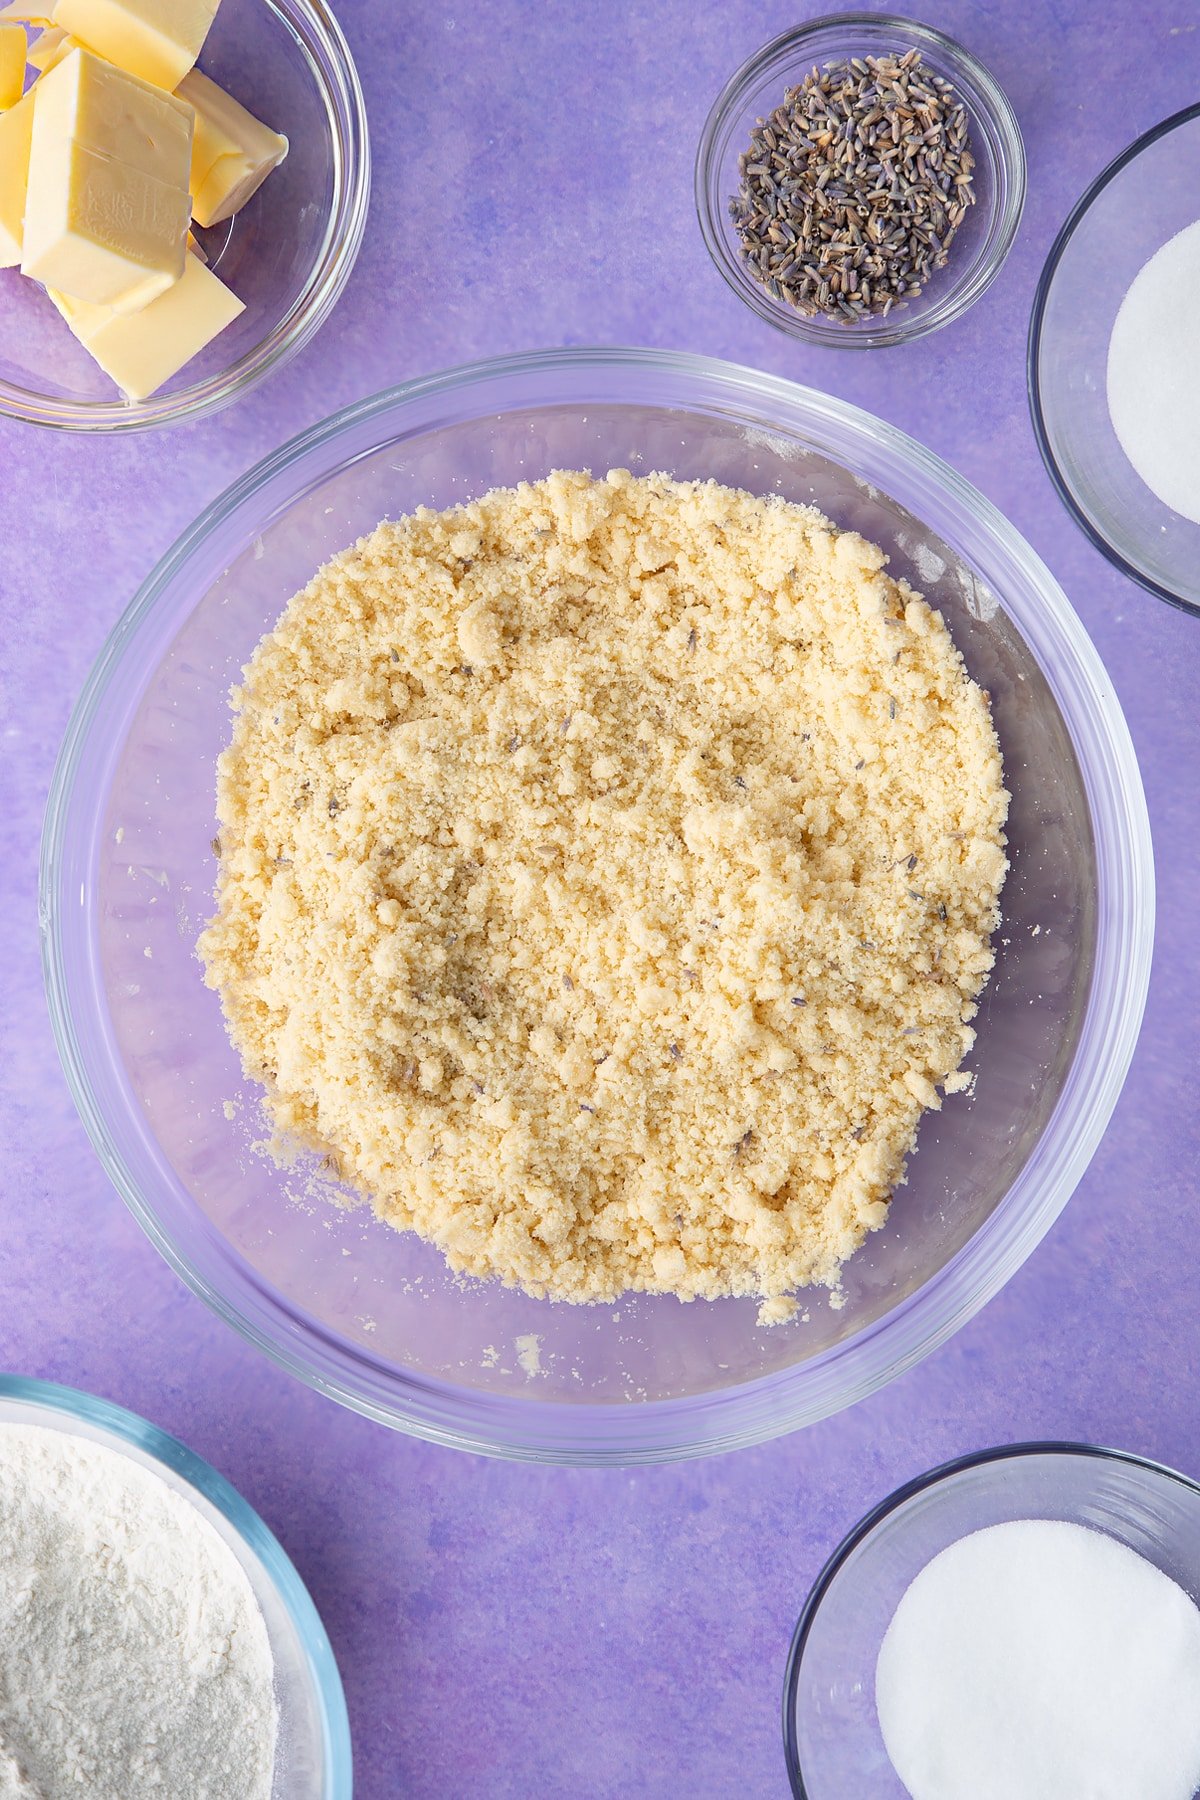 Flour, sugar, butter, lavender and water mixed to a crumb in a bowl. Ingredients to make lavender shortbread cookies.